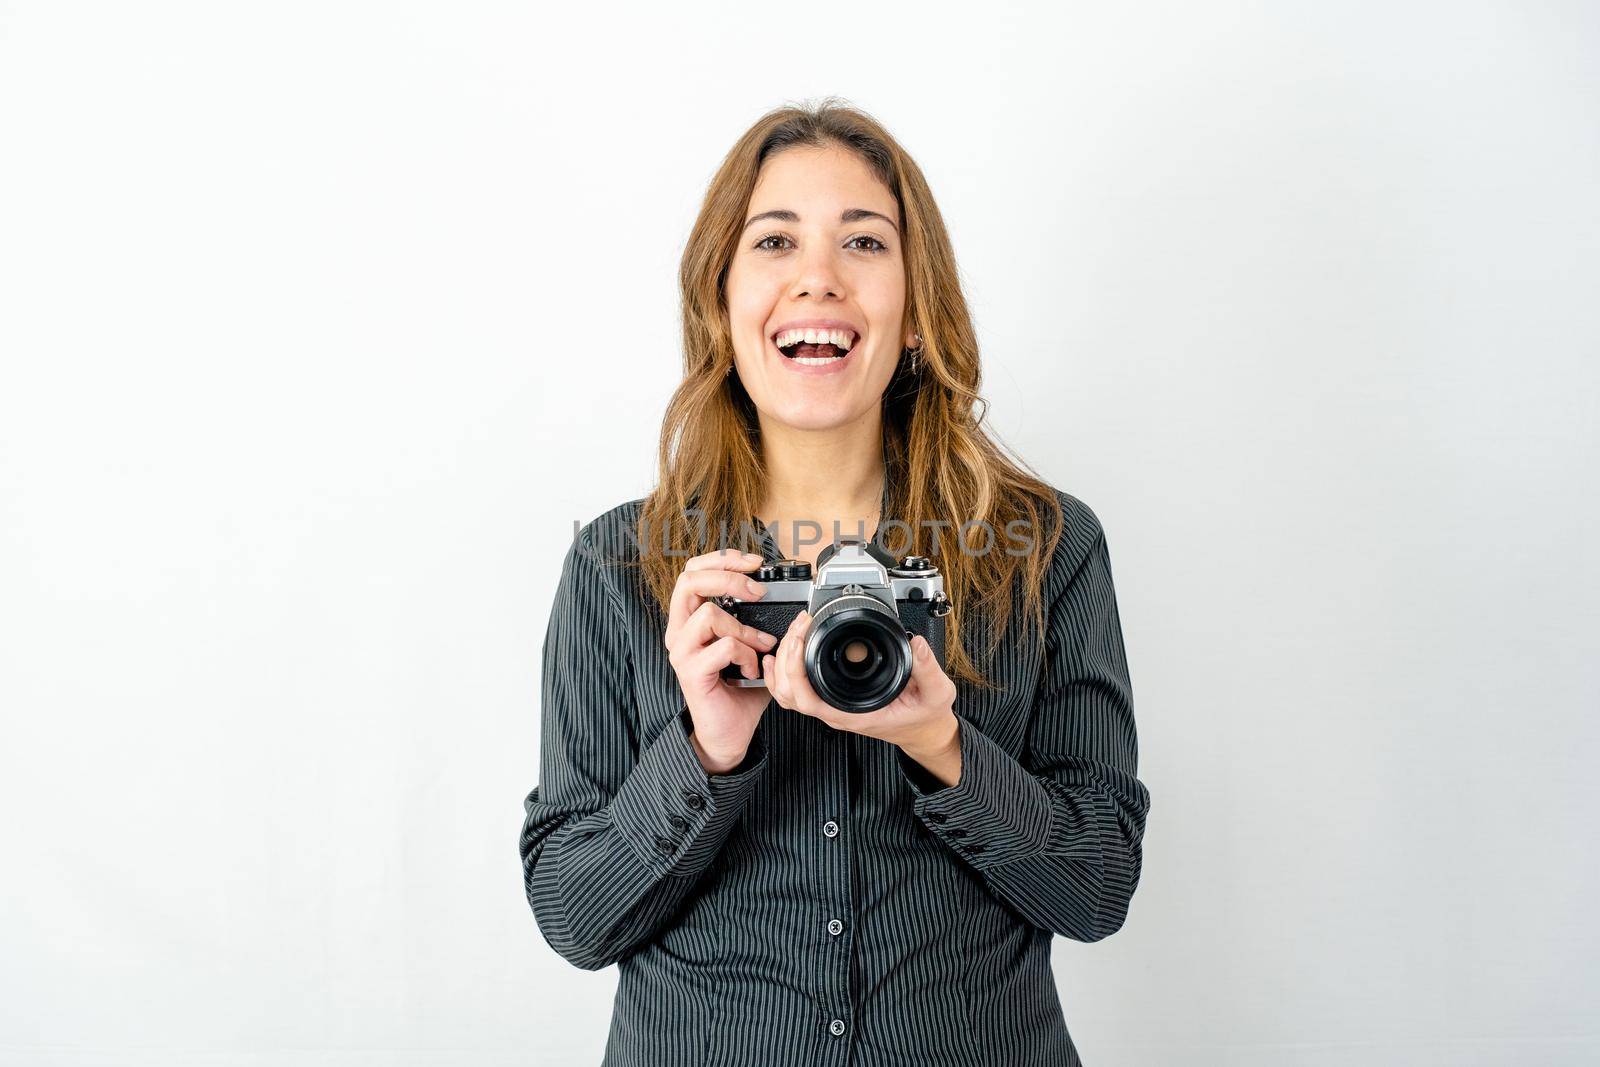 Studio shot of smiling happy young woman holding an old vintage photo camera watching photographer on white background for copy space. Concept of passion for imaging and history of classic photography